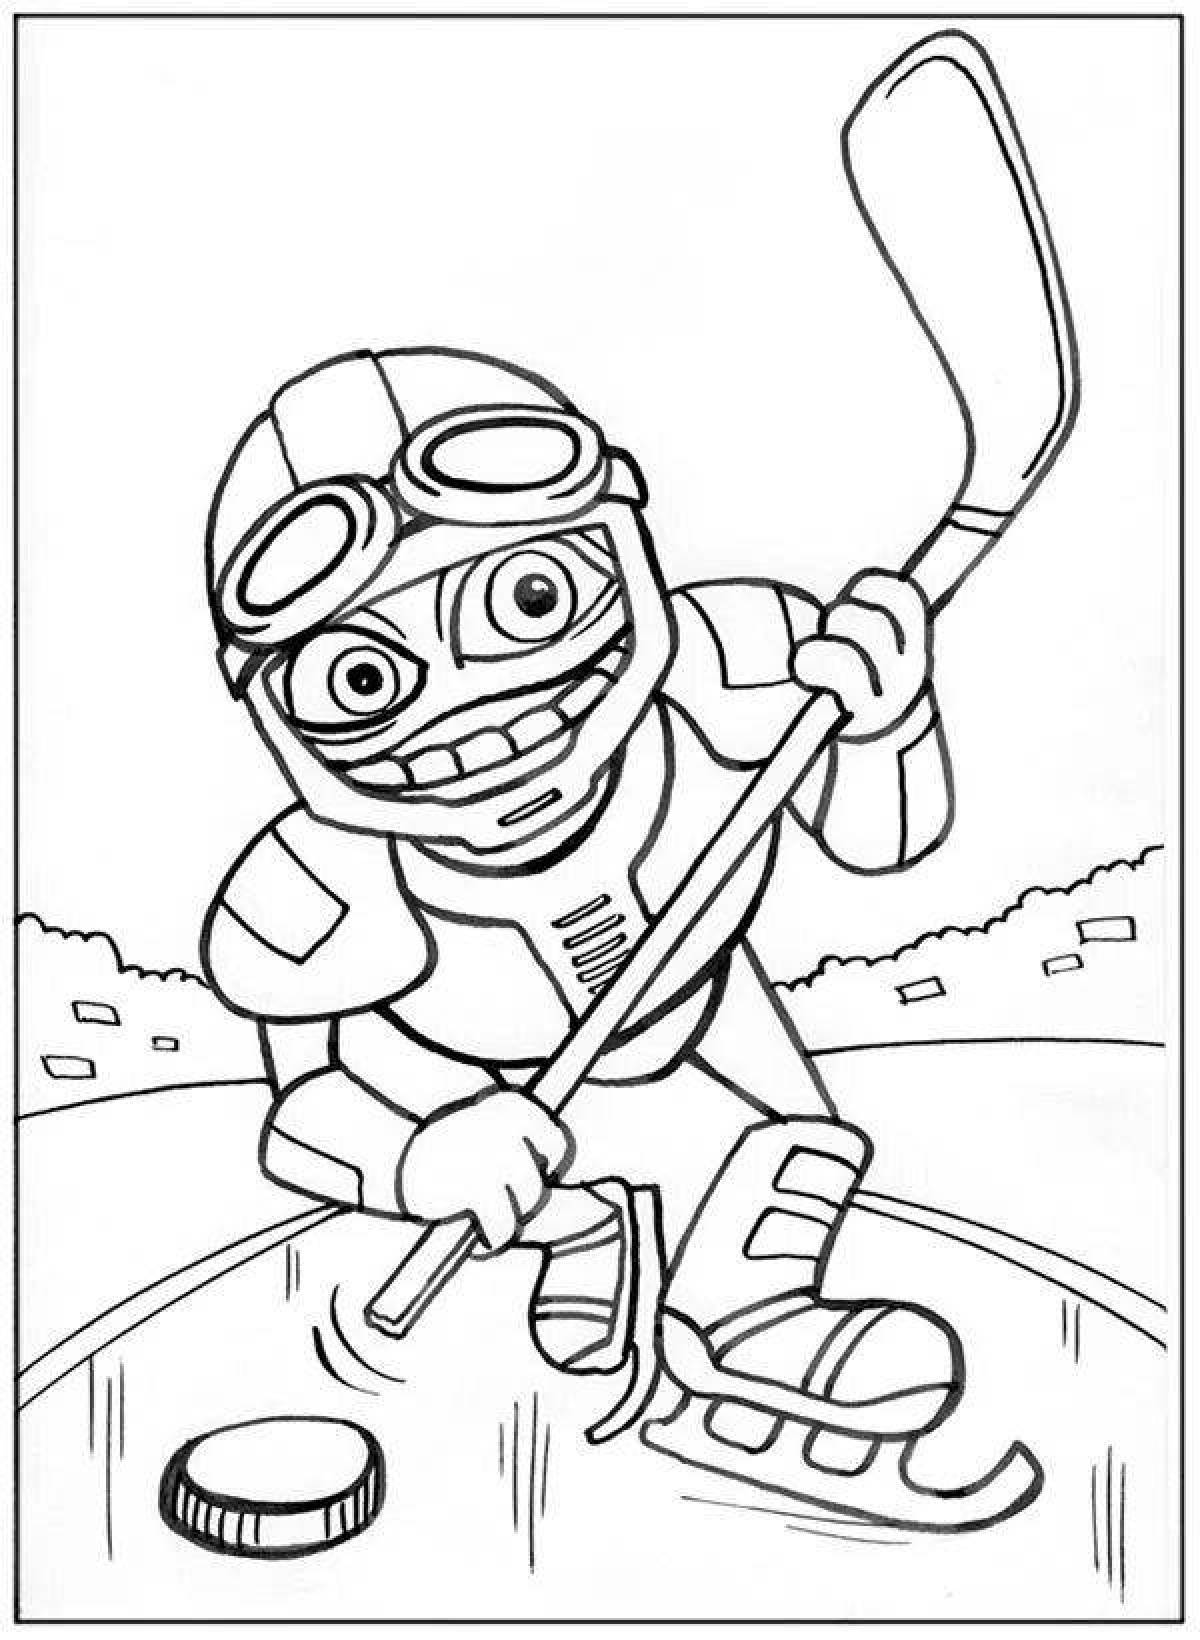 Coloring page glowing crazy frog